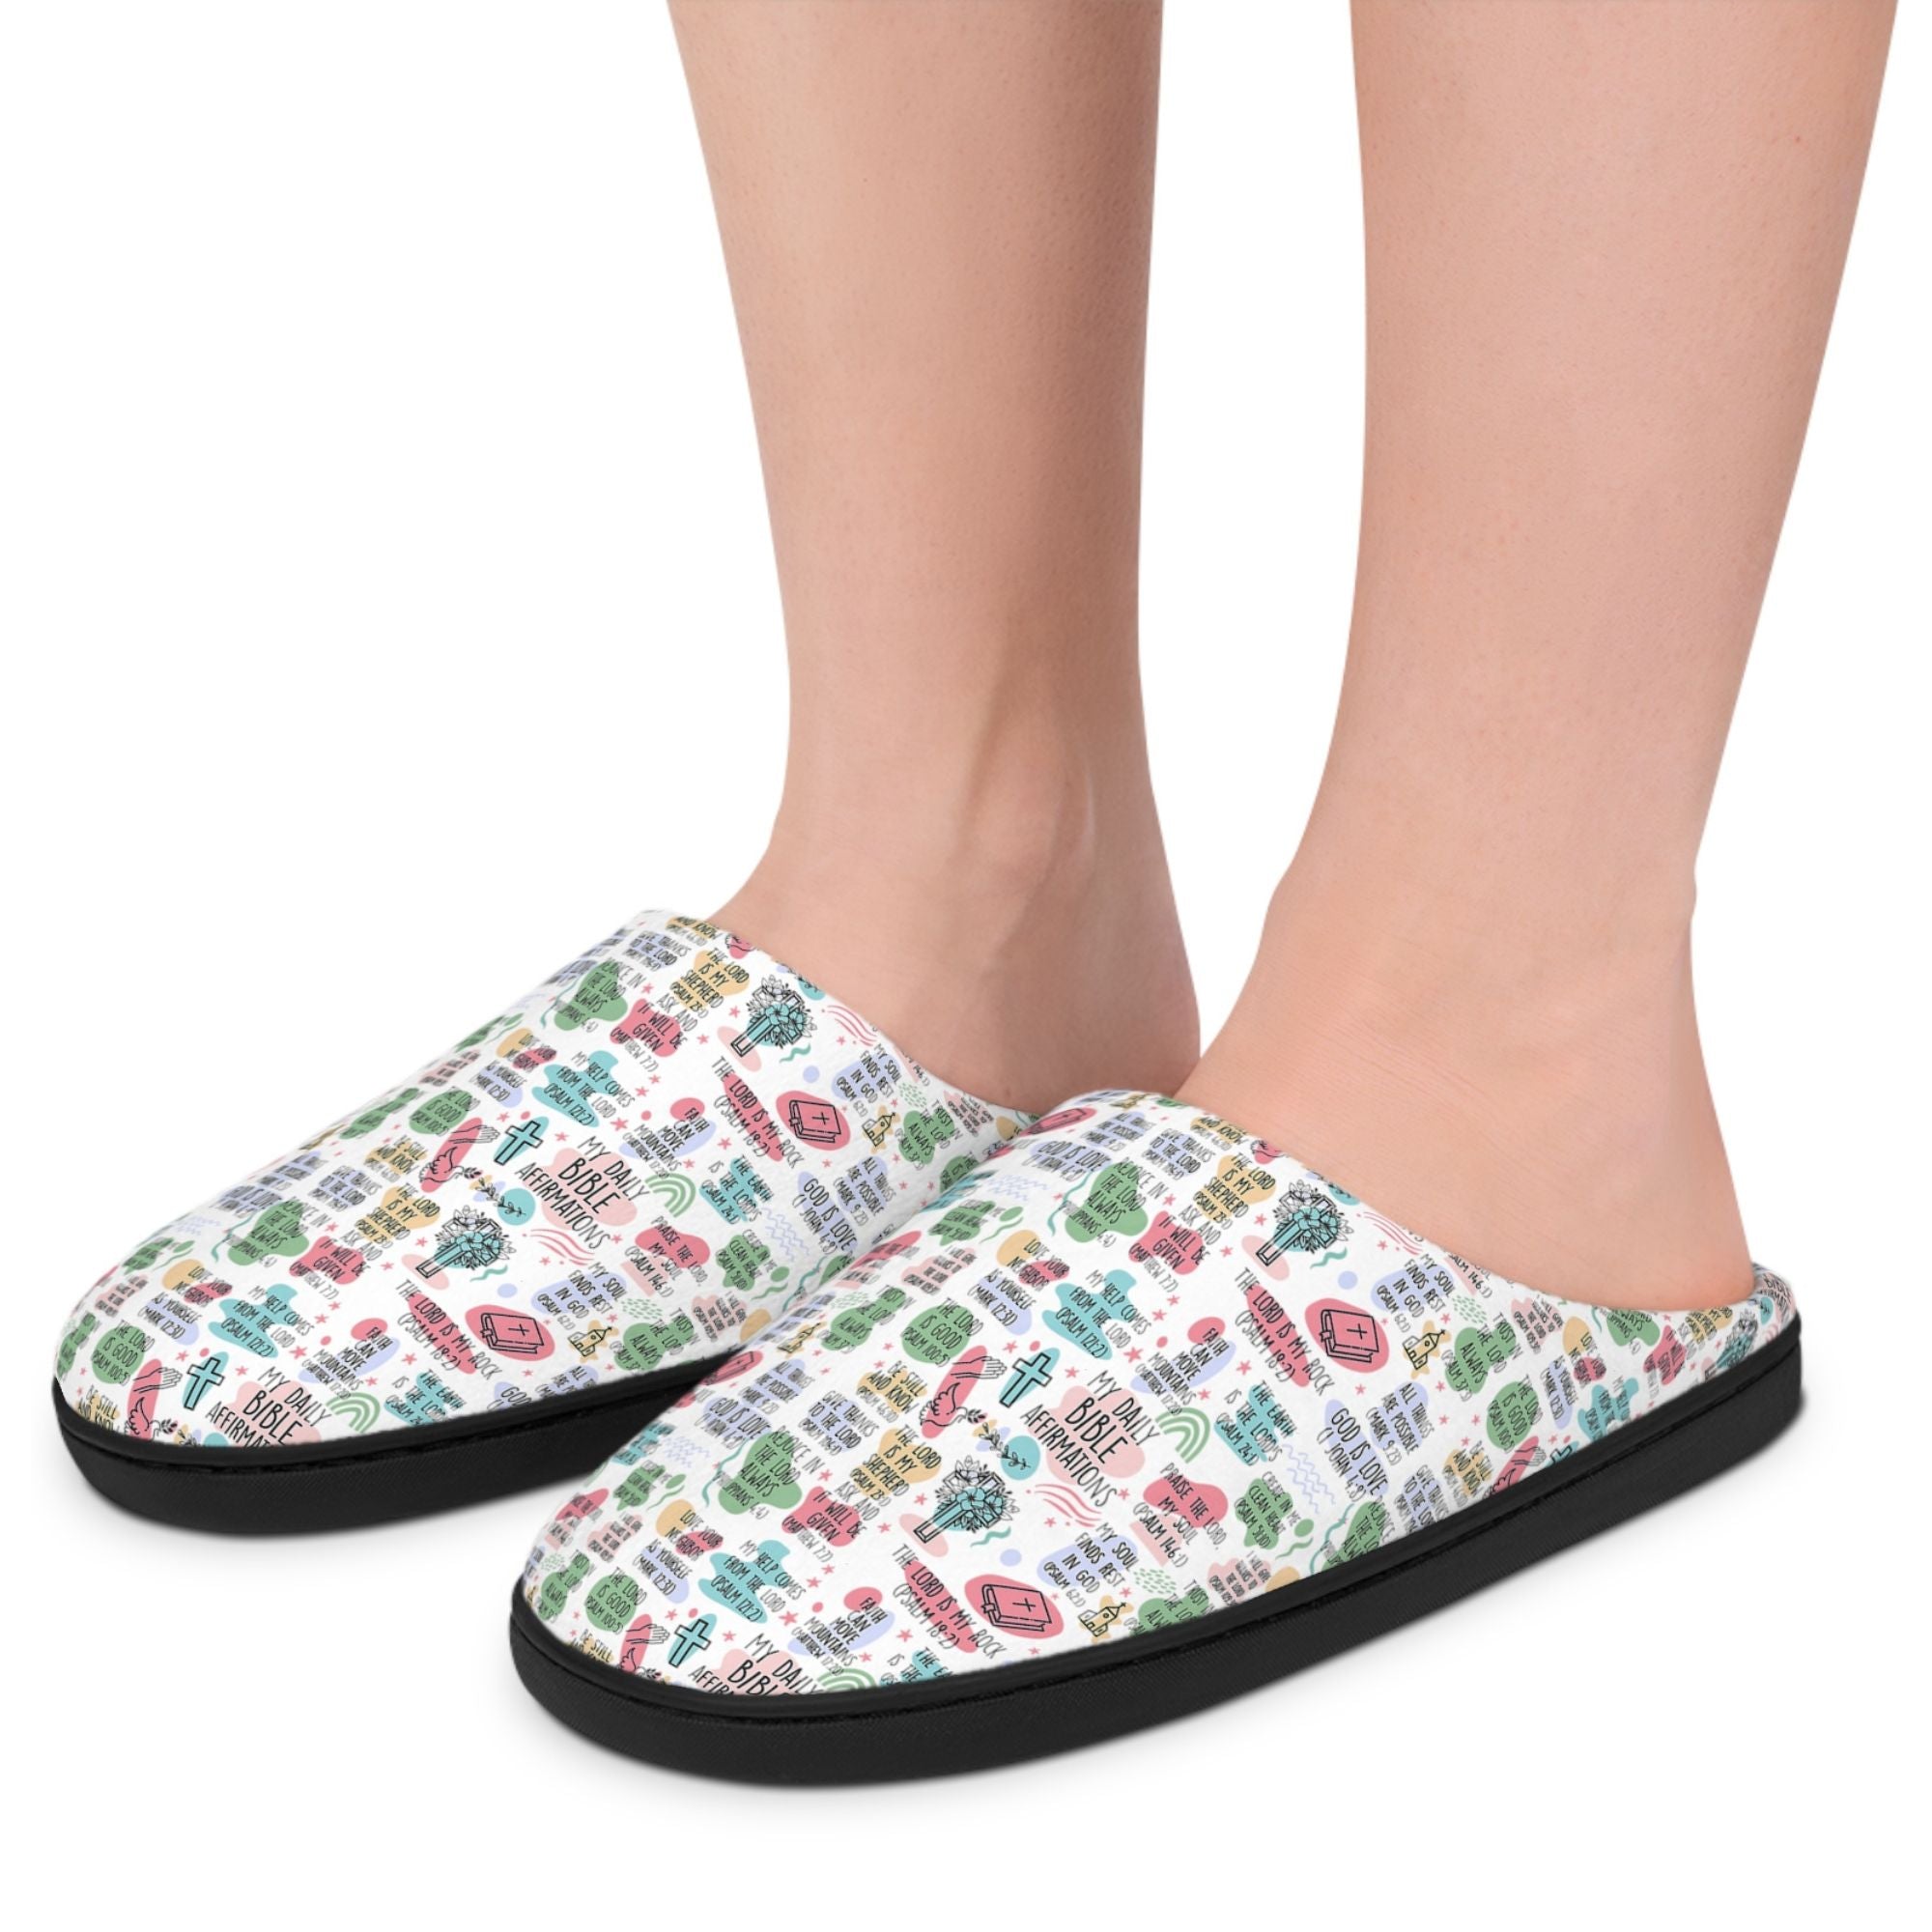 Daily Bible Affirmations Women's White Indoor Slippers - Matching Lounge / Pajama Pants and Shirt Available Size: US 7 - 8 Color: Black sole Jesus Passion Apparel